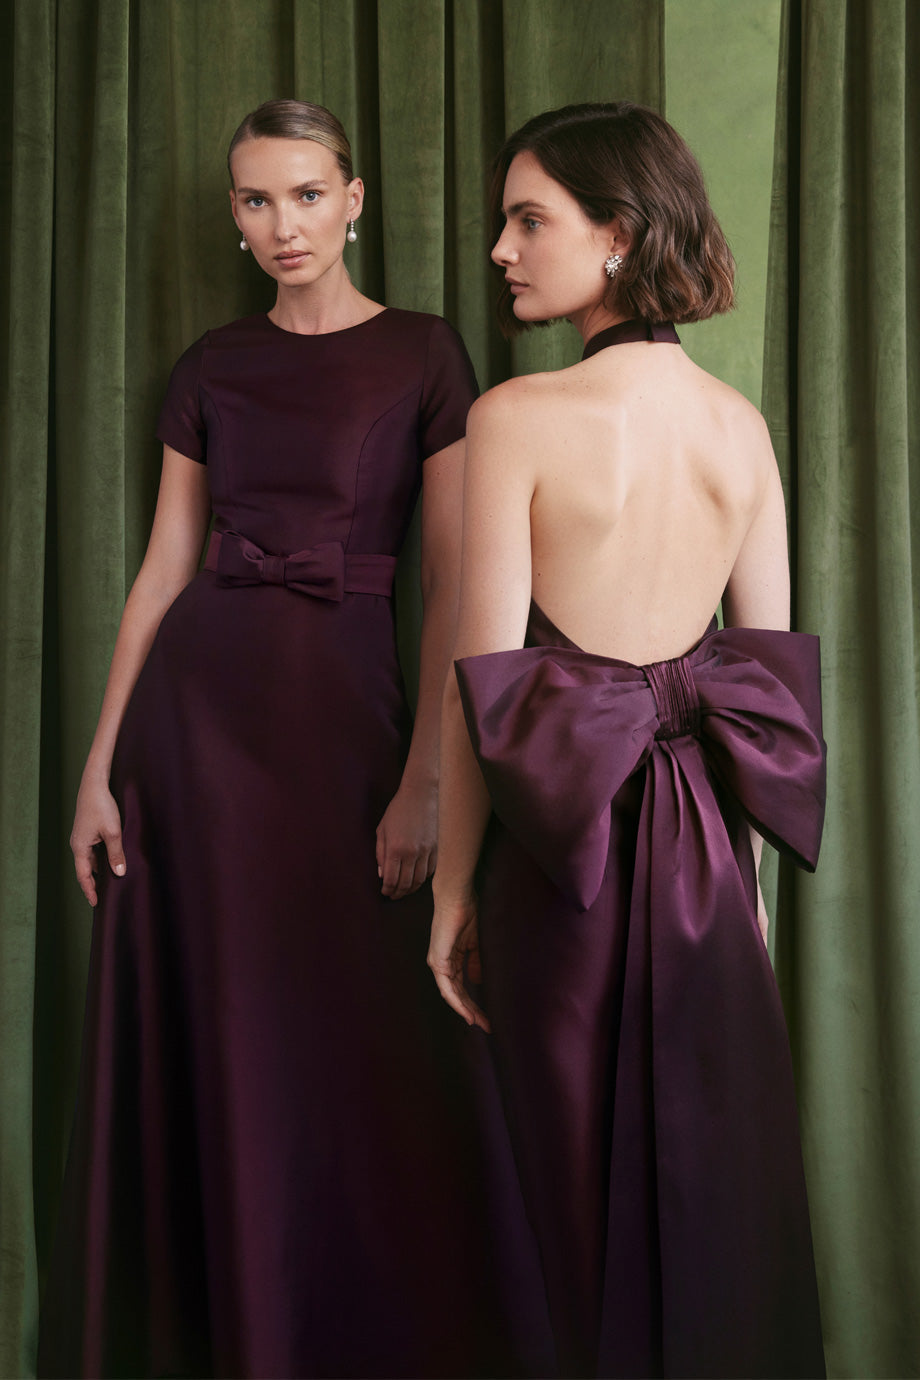 Caroline Silk and Wool A-Line Gown